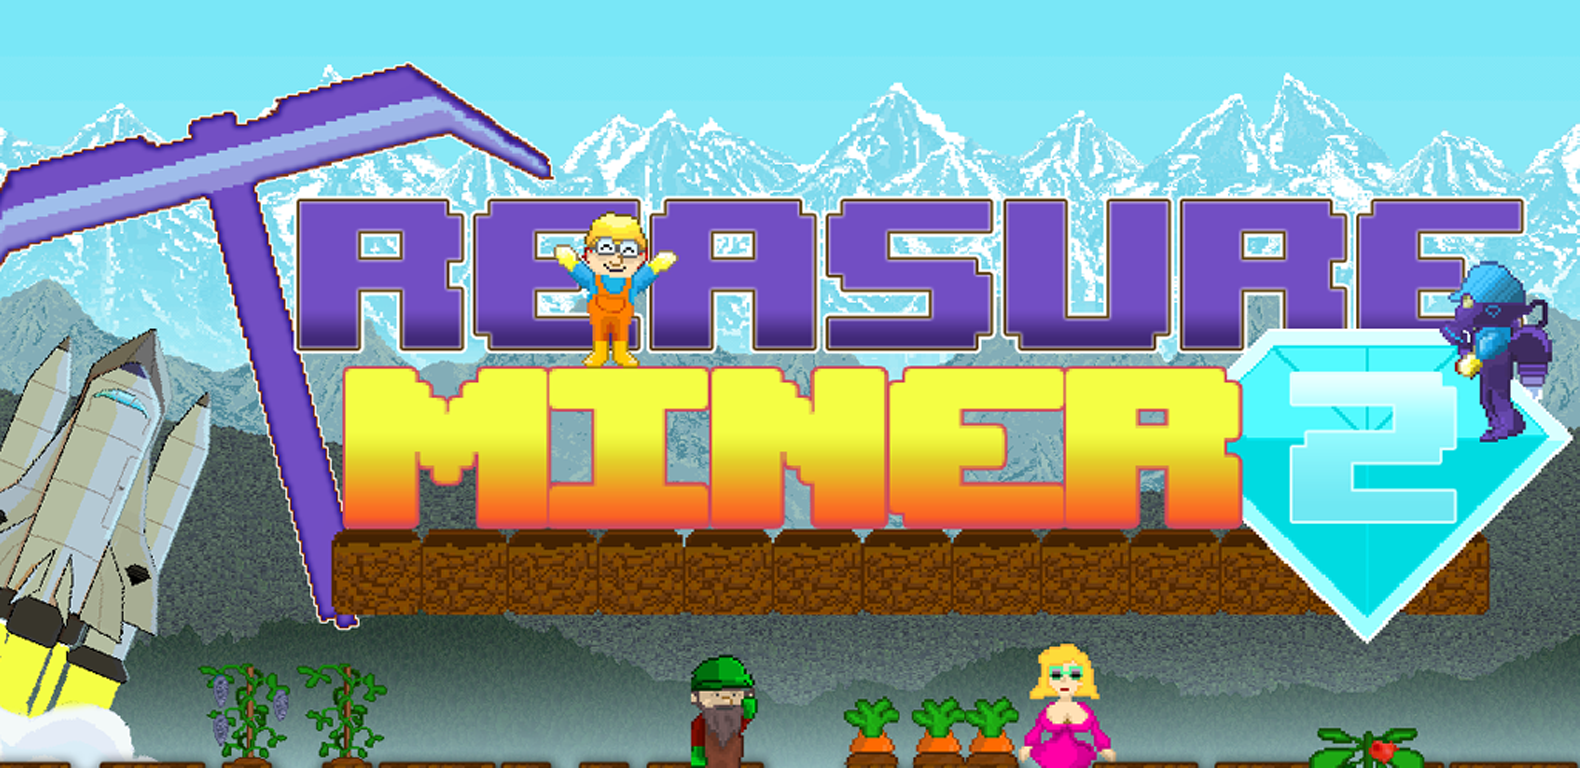 Treasure Miner - A free mining adventure Game for Android